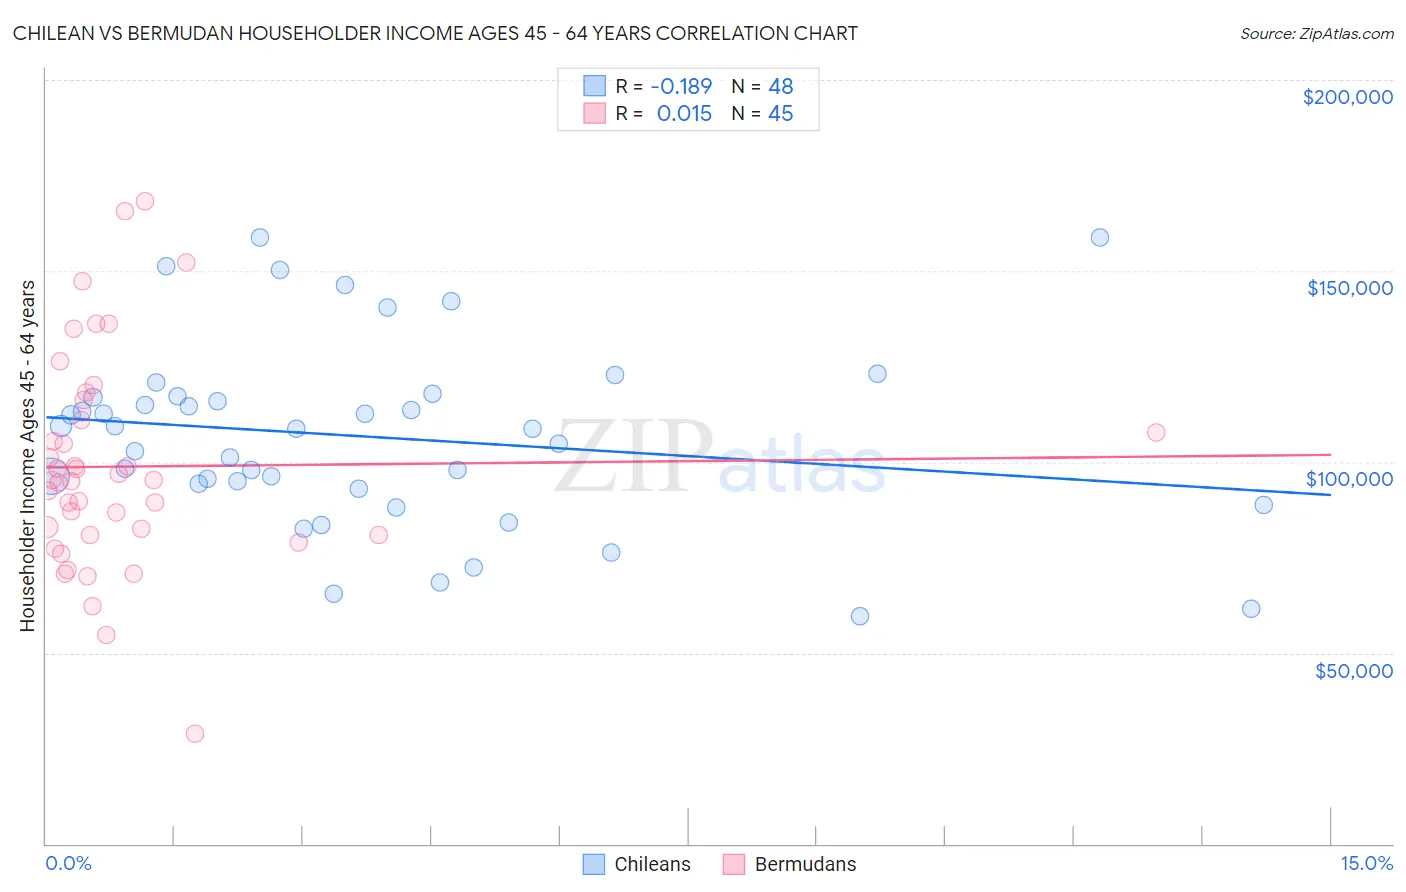 Chilean vs Bermudan Householder Income Ages 45 - 64 years